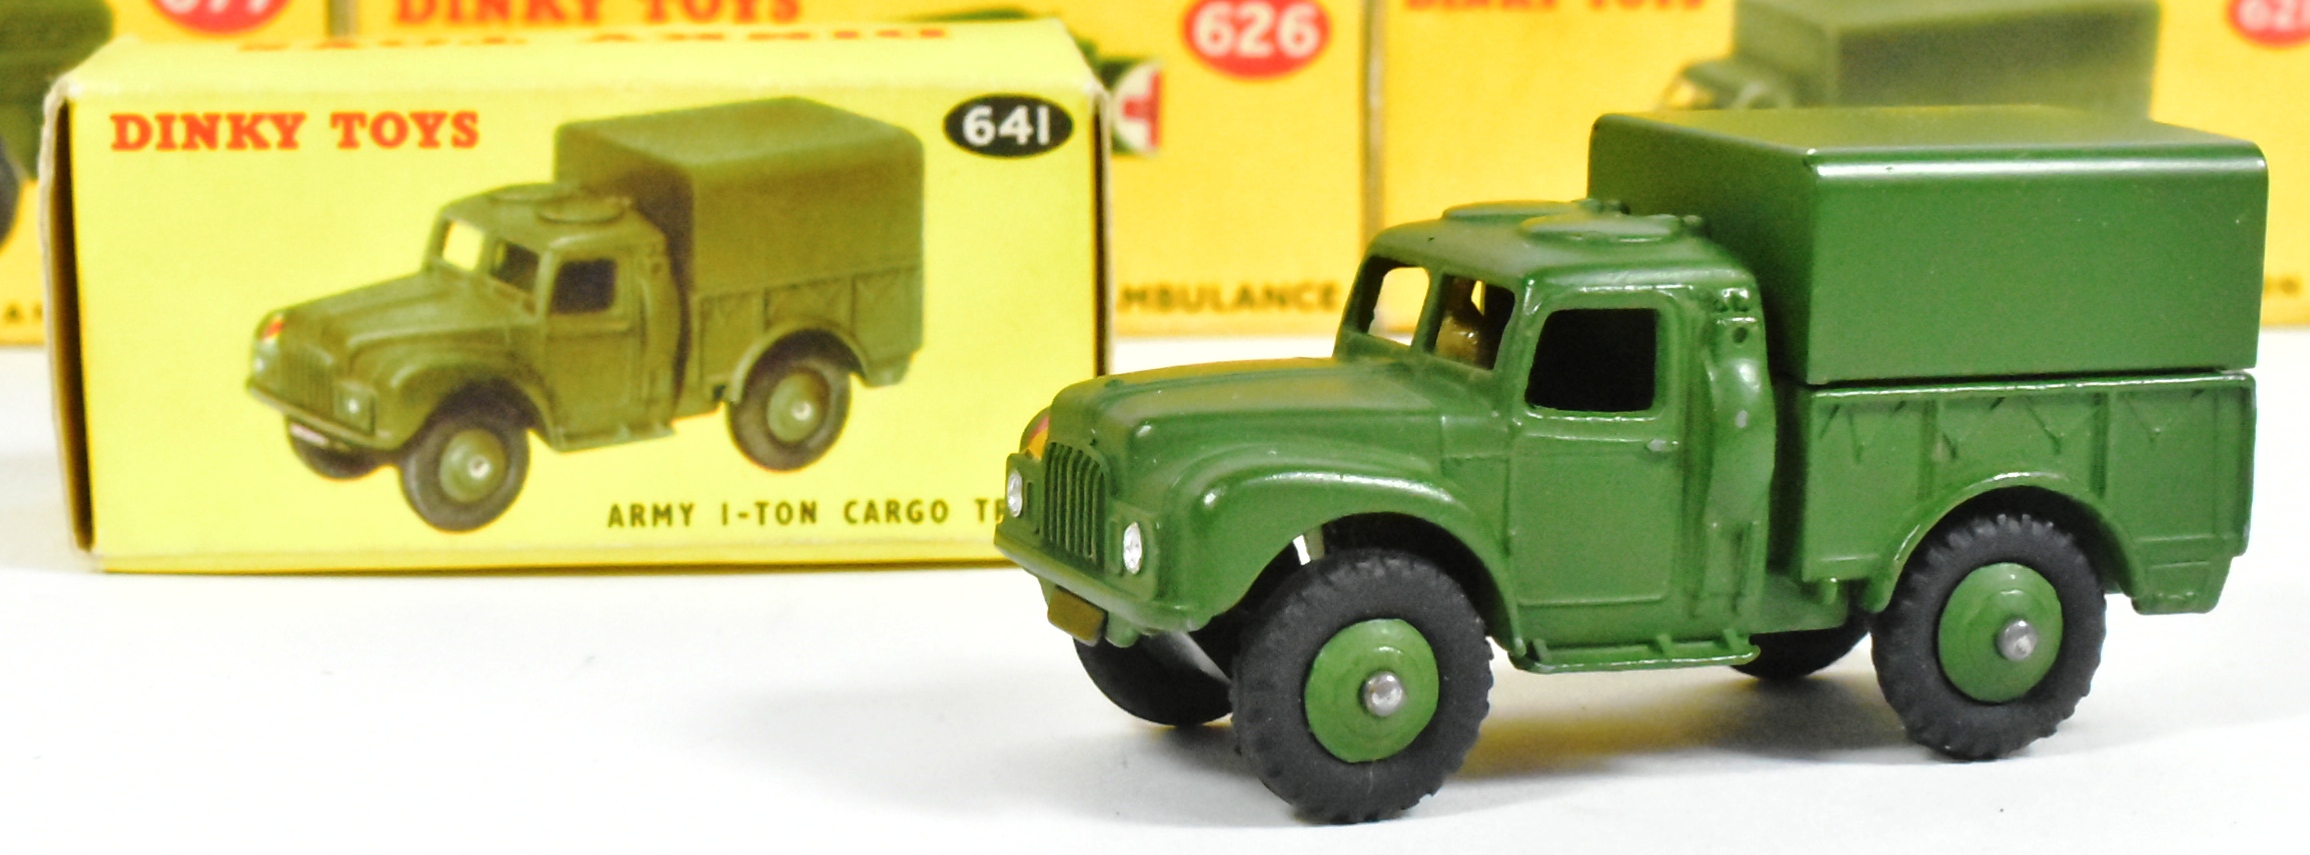 DIECAST - COLLECTION OF DINKY TOYS DIECAST MILITARY MODELS - Image 4 of 5